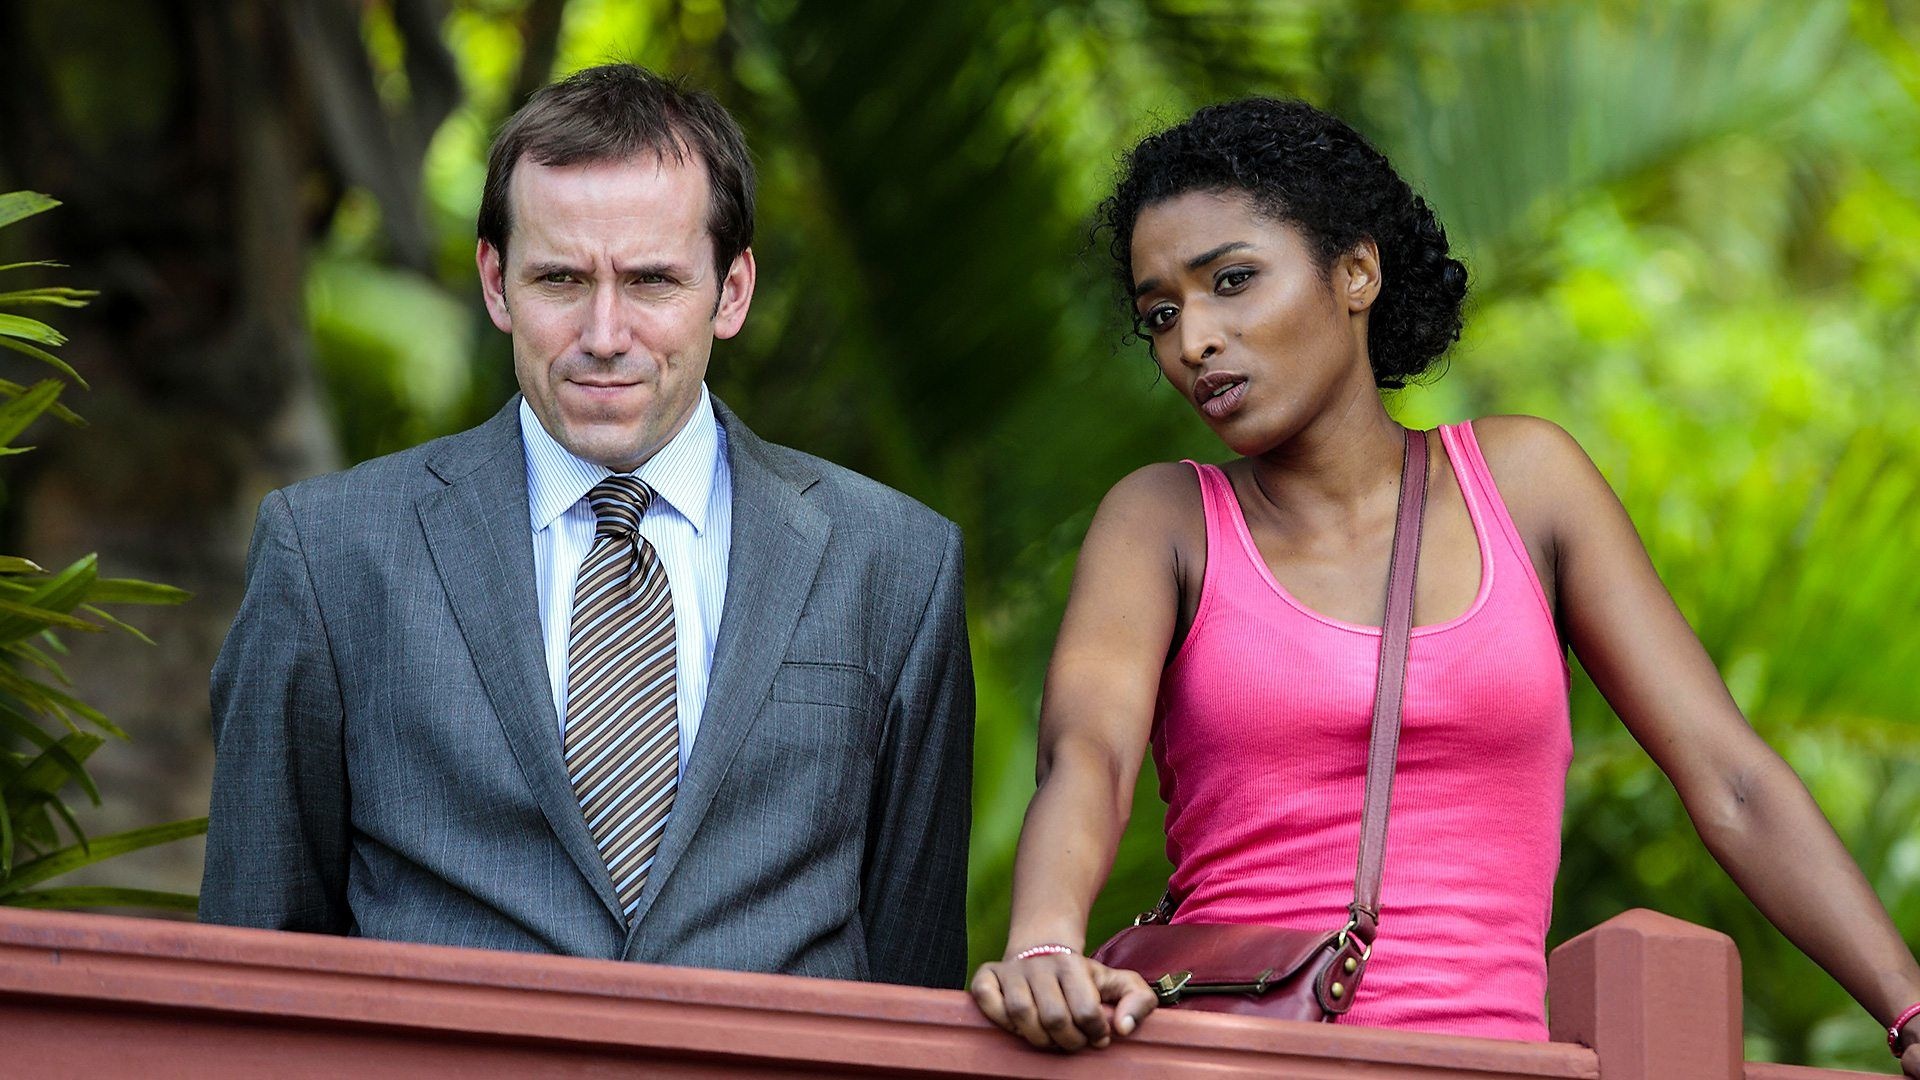 Death in Paradise, Free TVmaze images, Tropical island backdrop, Engaging characters, 1920x1080 Full HD Desktop